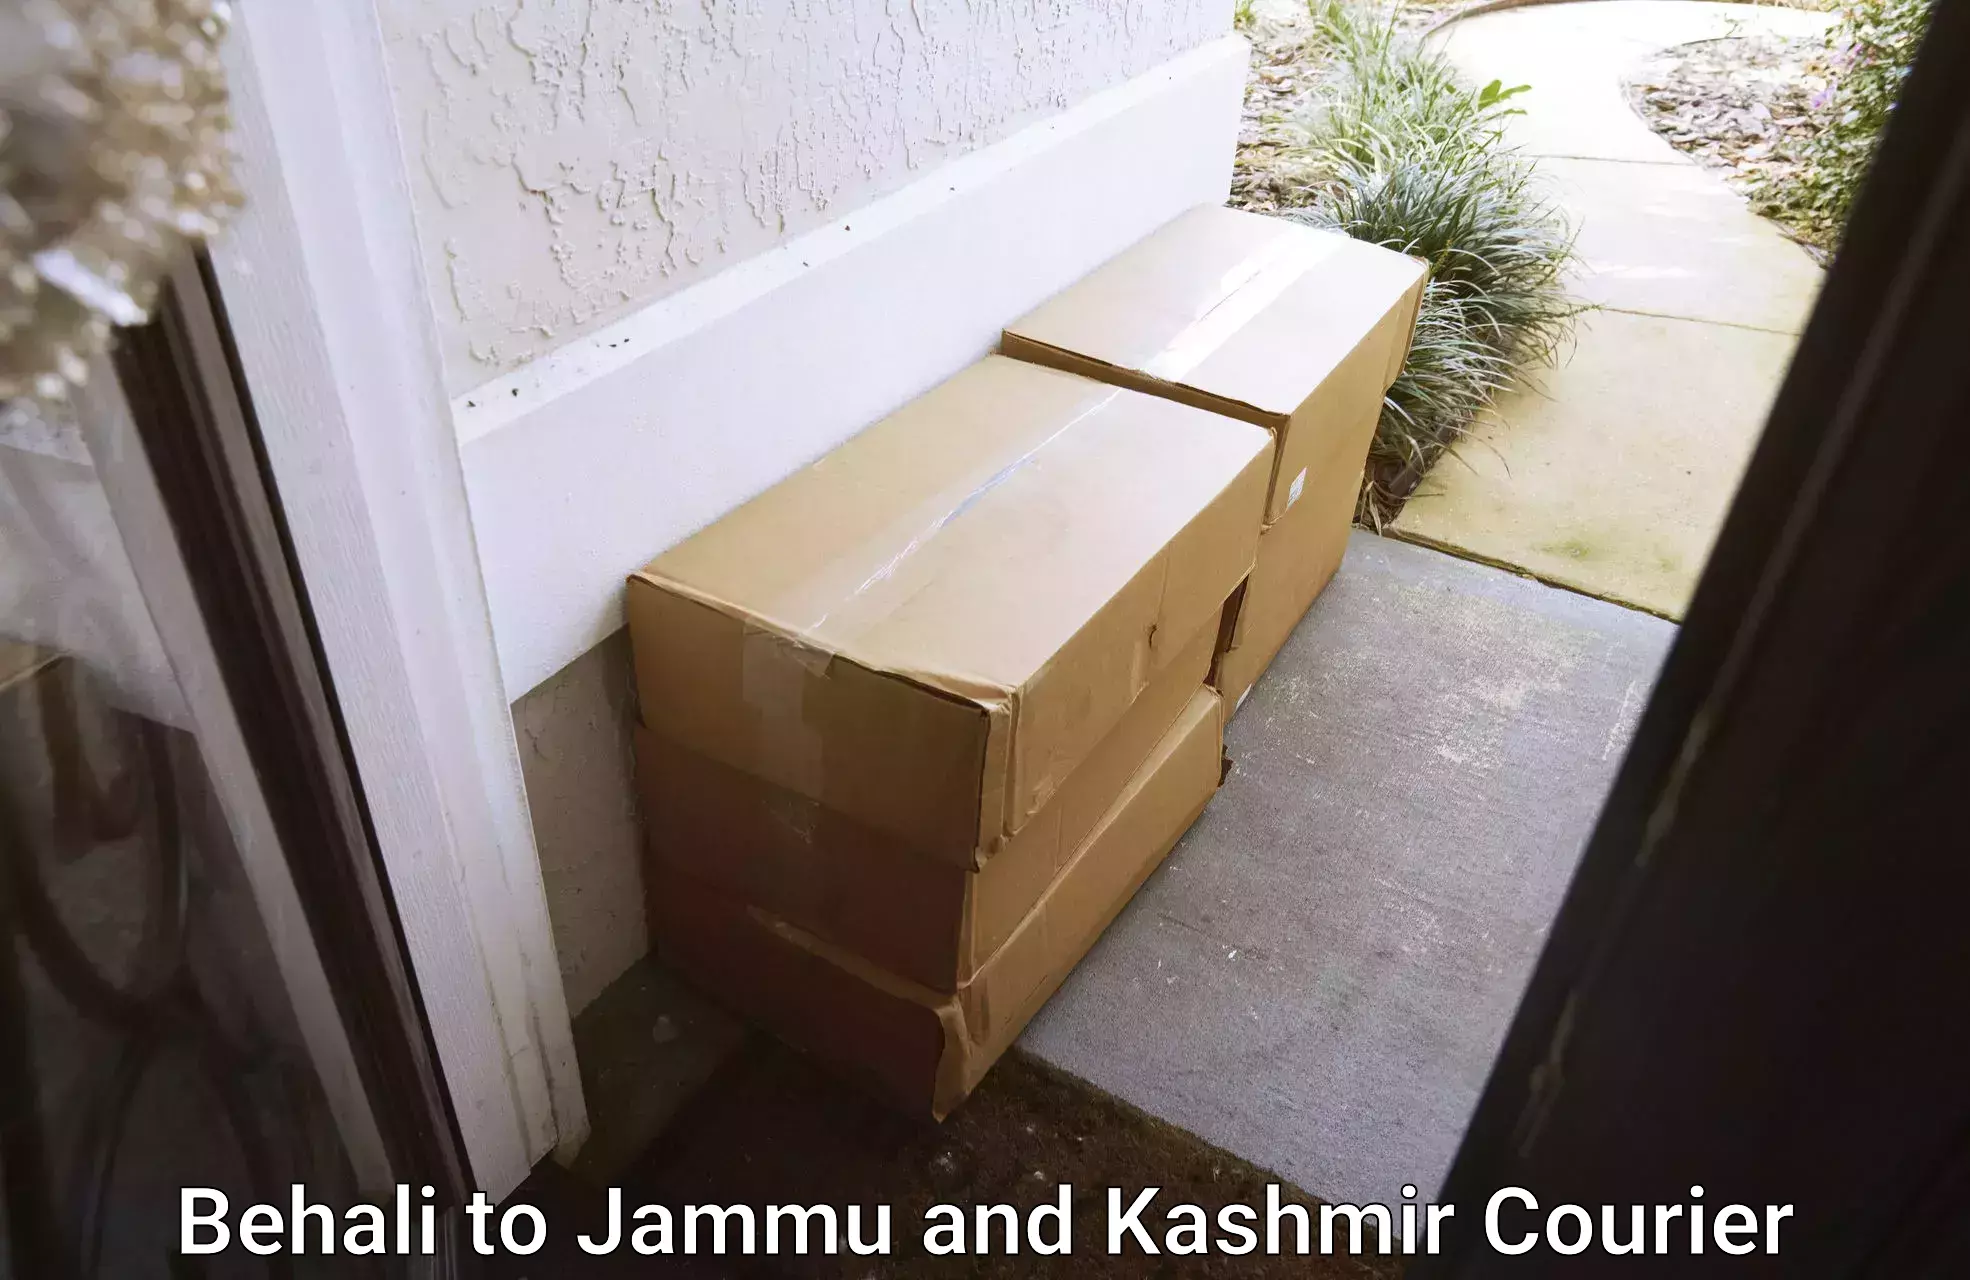 State-of-the-art courier technology Behali to Sopore